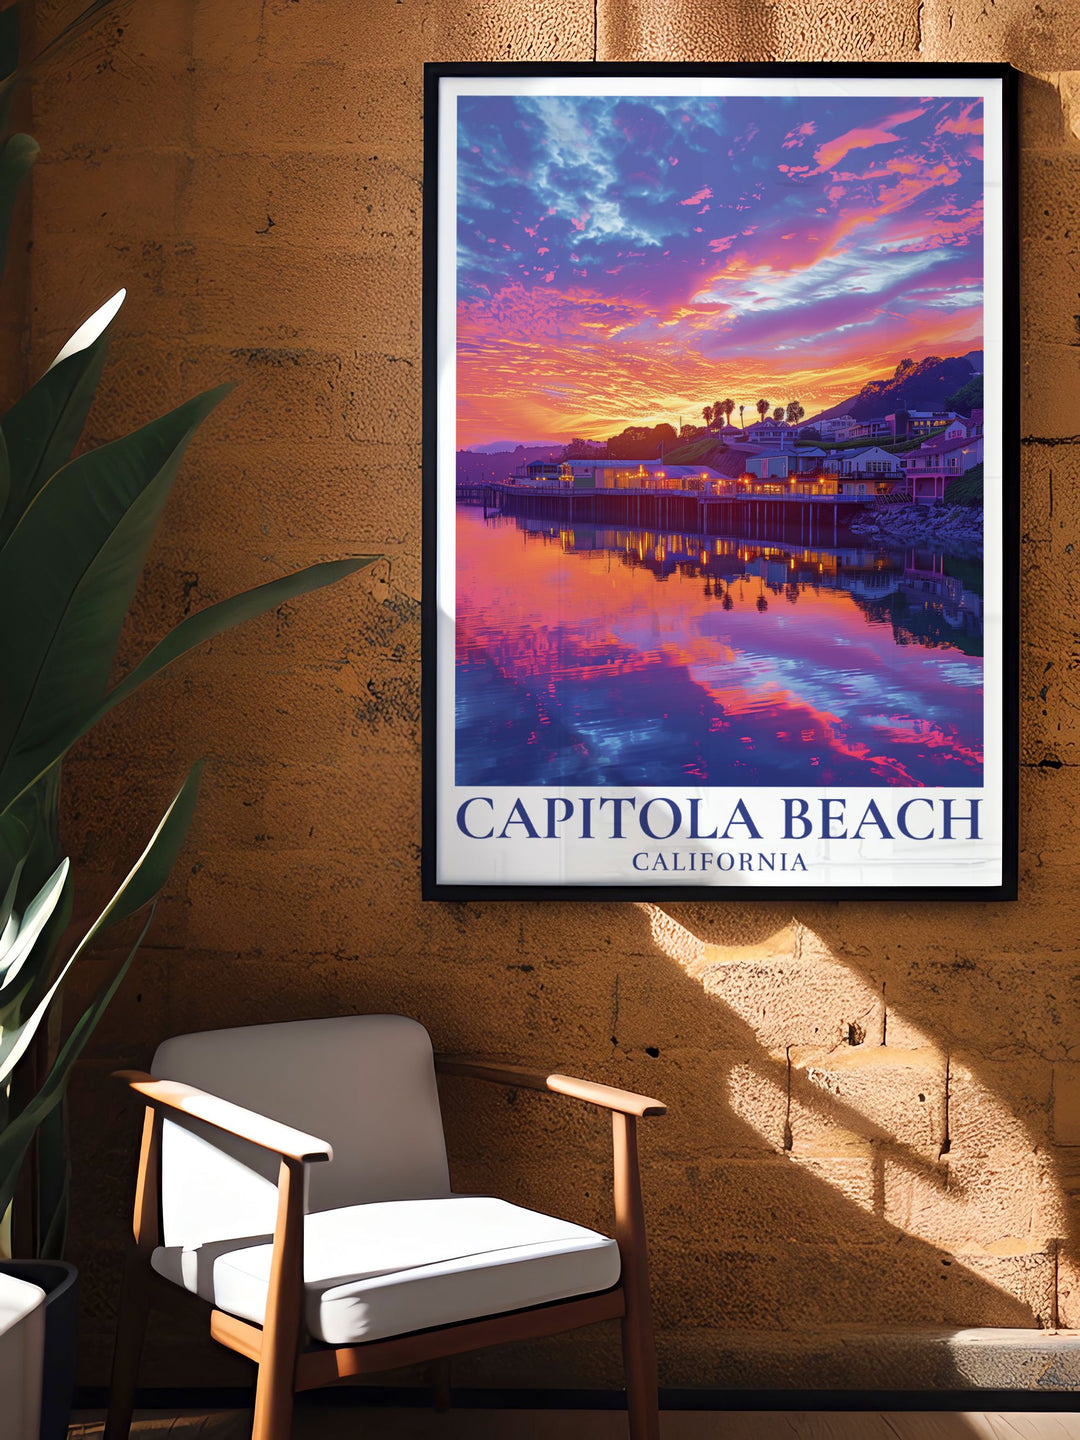 Unique Sunset over Capitola Wharf Poster featuring the Wharf scene bathed in stunning shades of orange and pink perfect for adding coastal charm to your space suitable for various decor styles from contemporary to classic